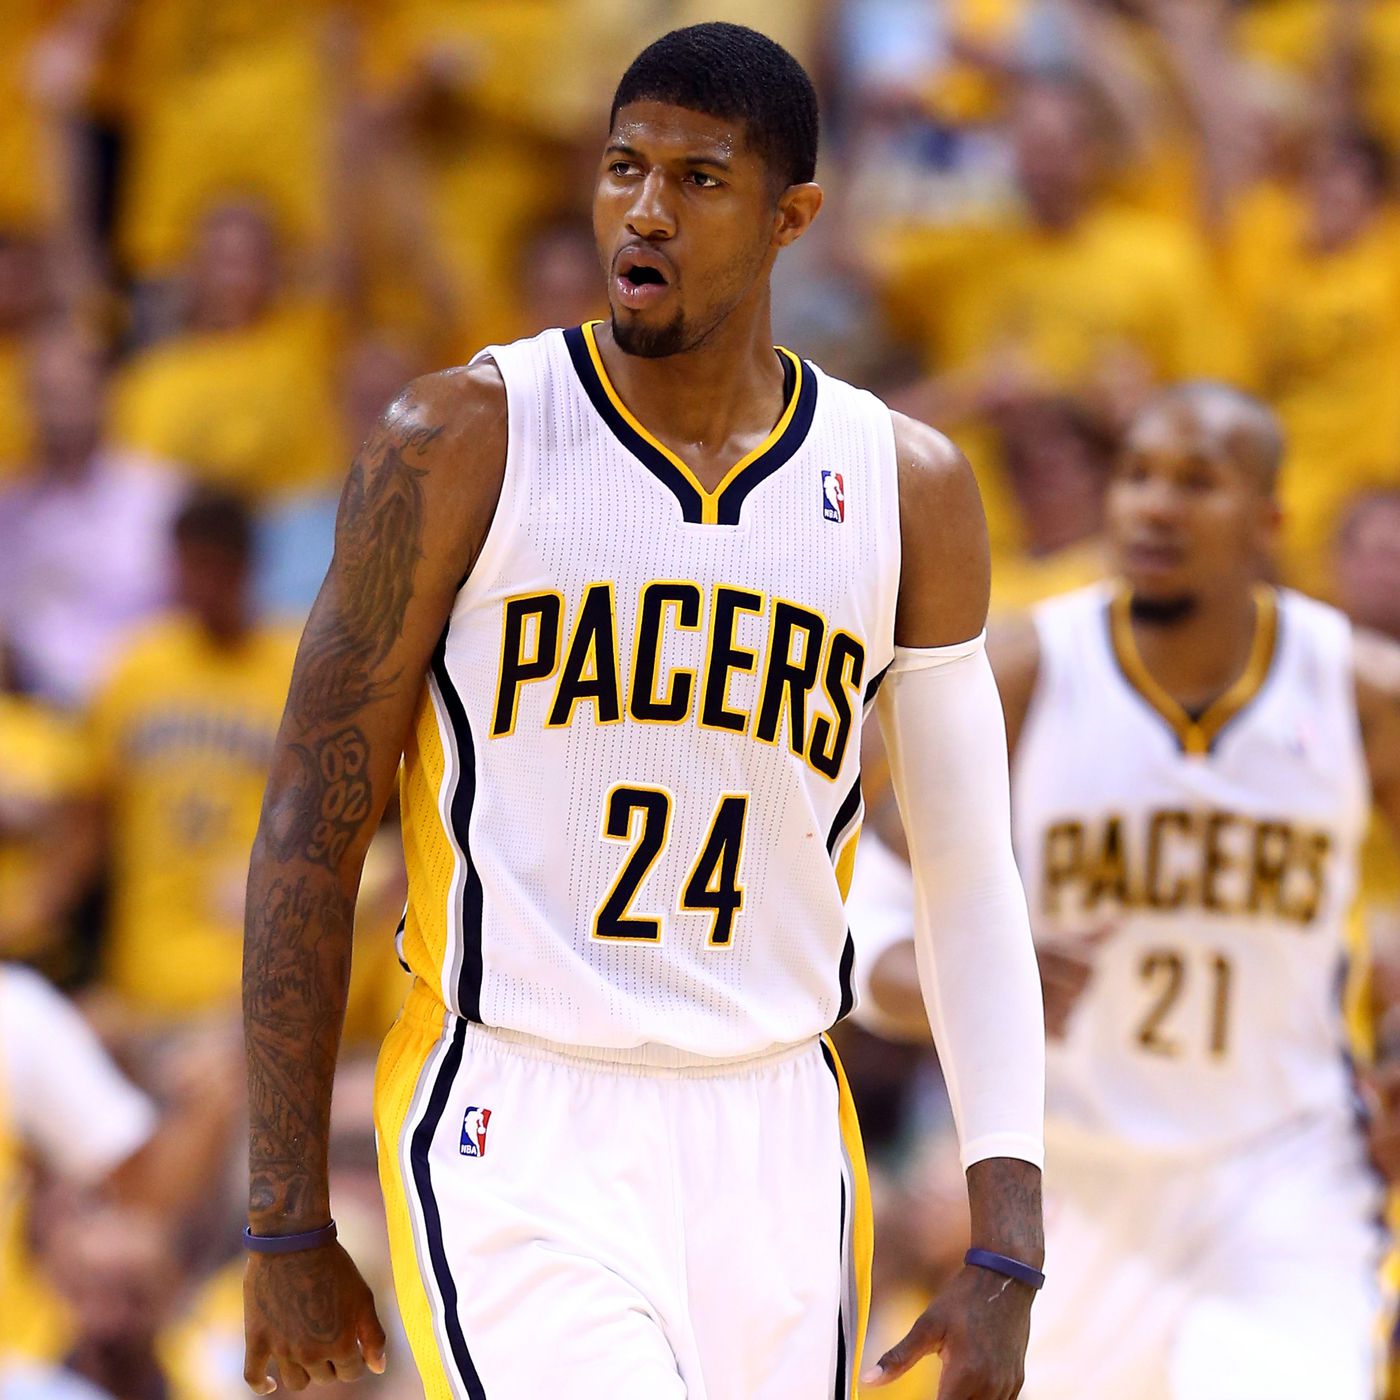 paul george 24 pacers jersey